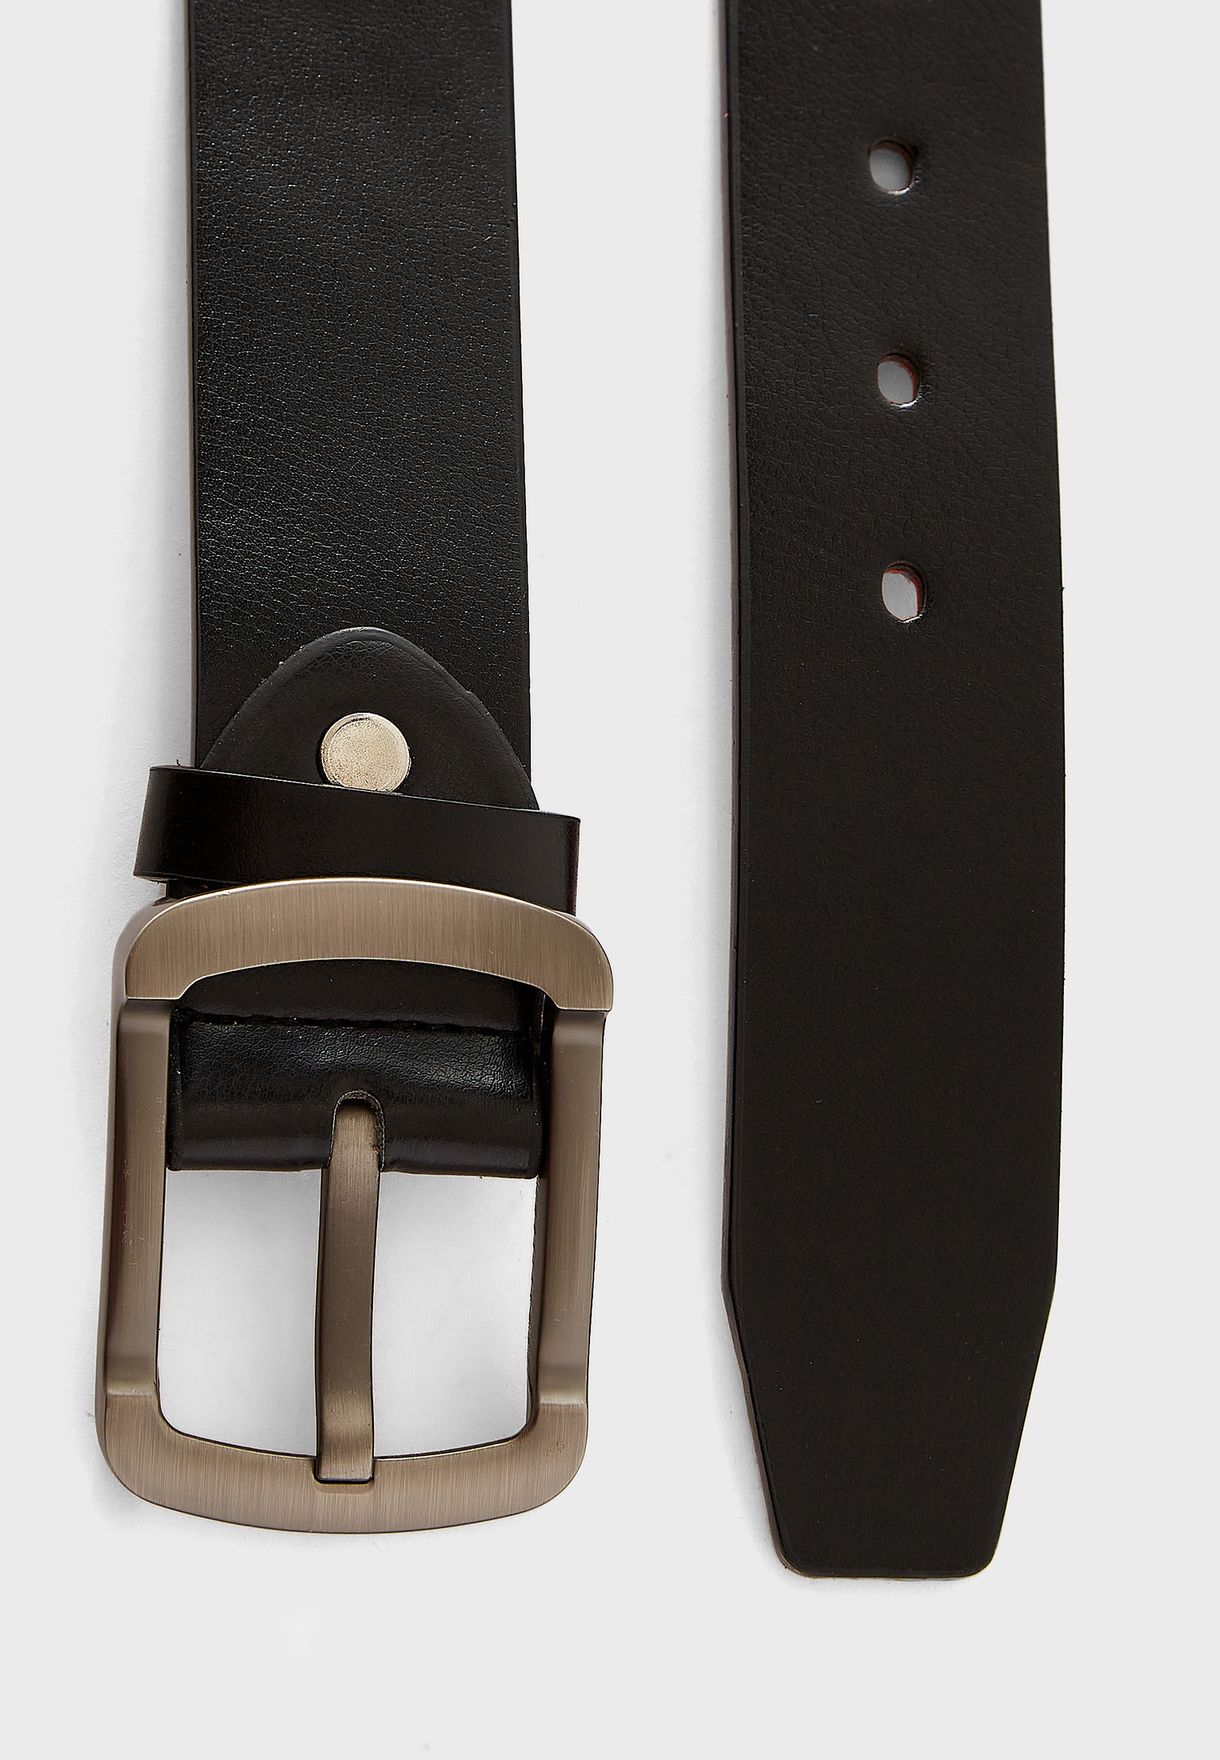 Allocated Hole Casual Belt